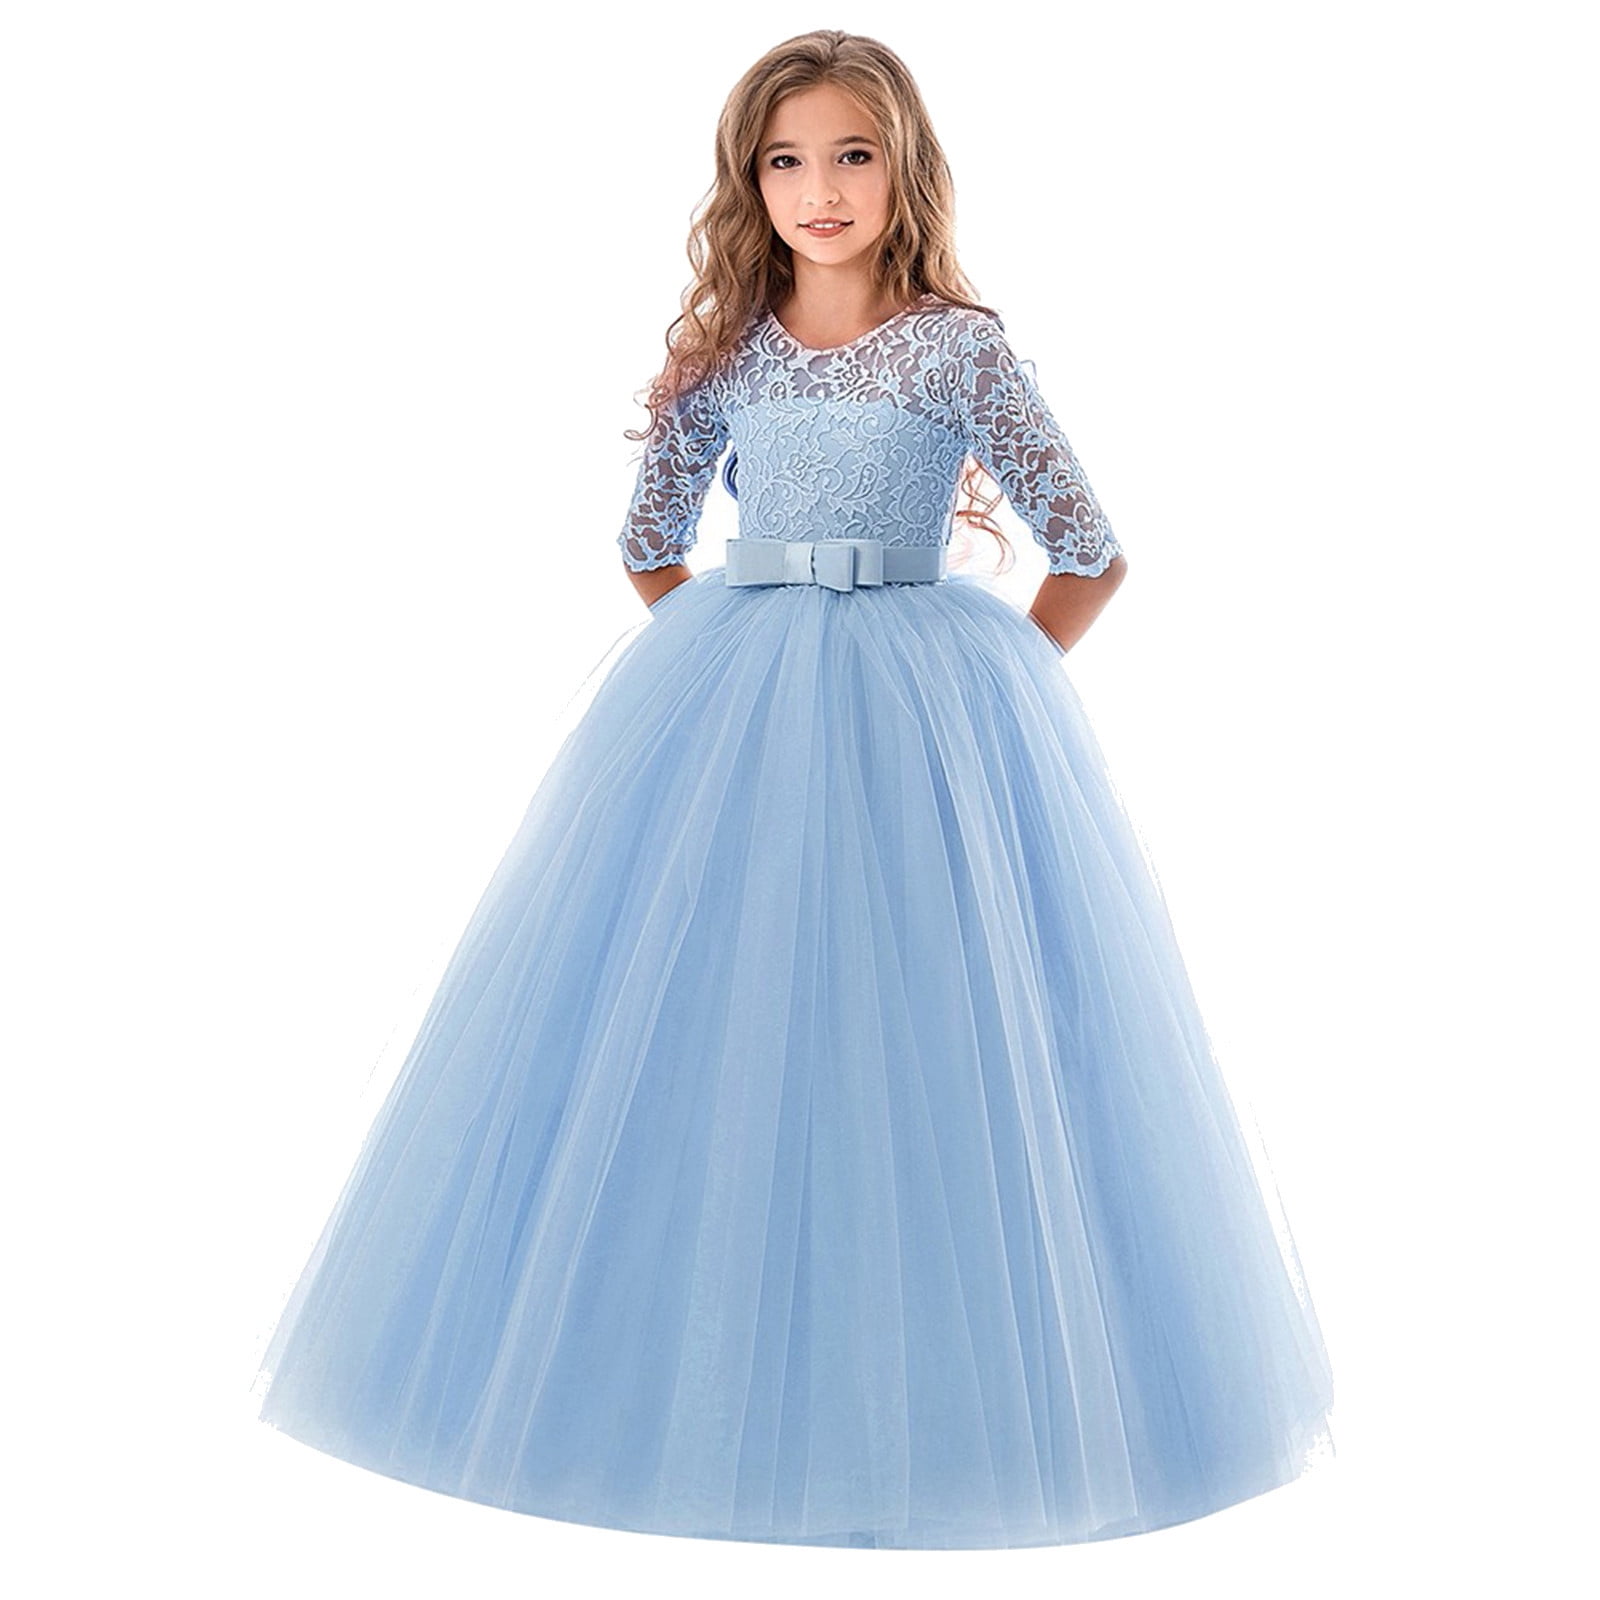 beautiful new gown for girls | baby girls gown | 5/6 years gown | 6/7 years  gown | 7/8 years gown | 8/9 years gown | 9/10 years gown | 10/11 years gown  | 11/12 years gown | 12/13 years gown | 13/14 years gown | 14/15 years gown  | 15/16 years gown